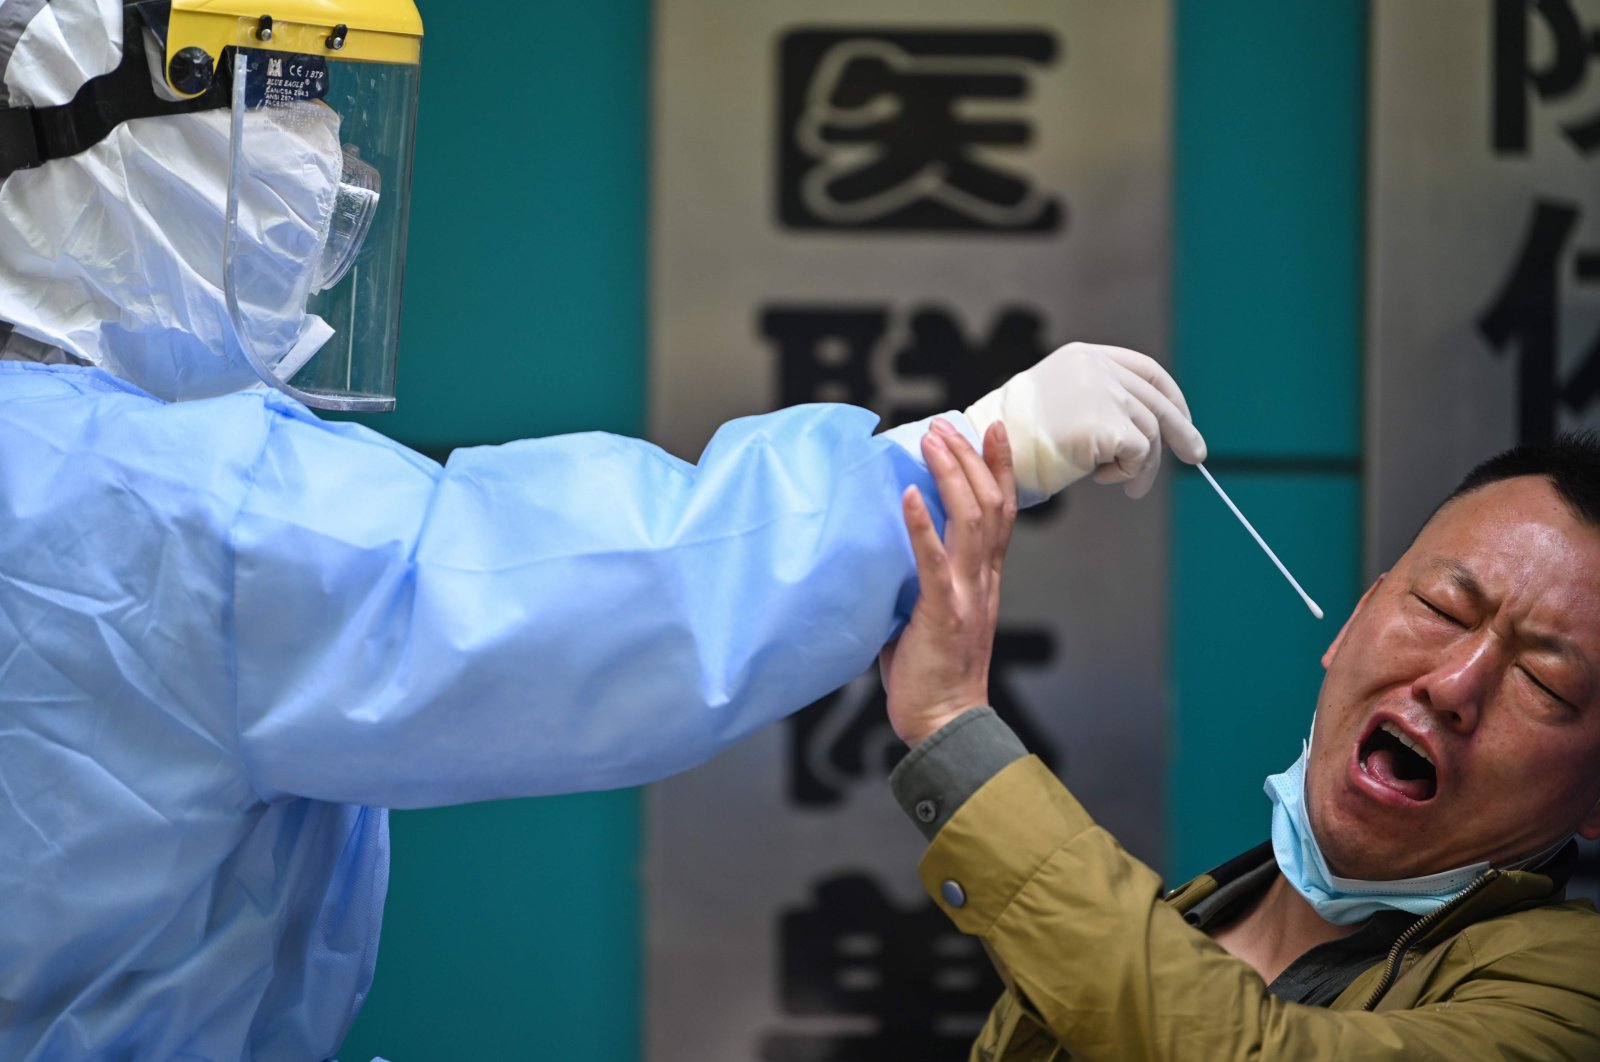 A man being tested for COVID-19 reacts as a medical worker takes a swab sample, in Wuhan, China, April 16, 2020. (AFP Photo)